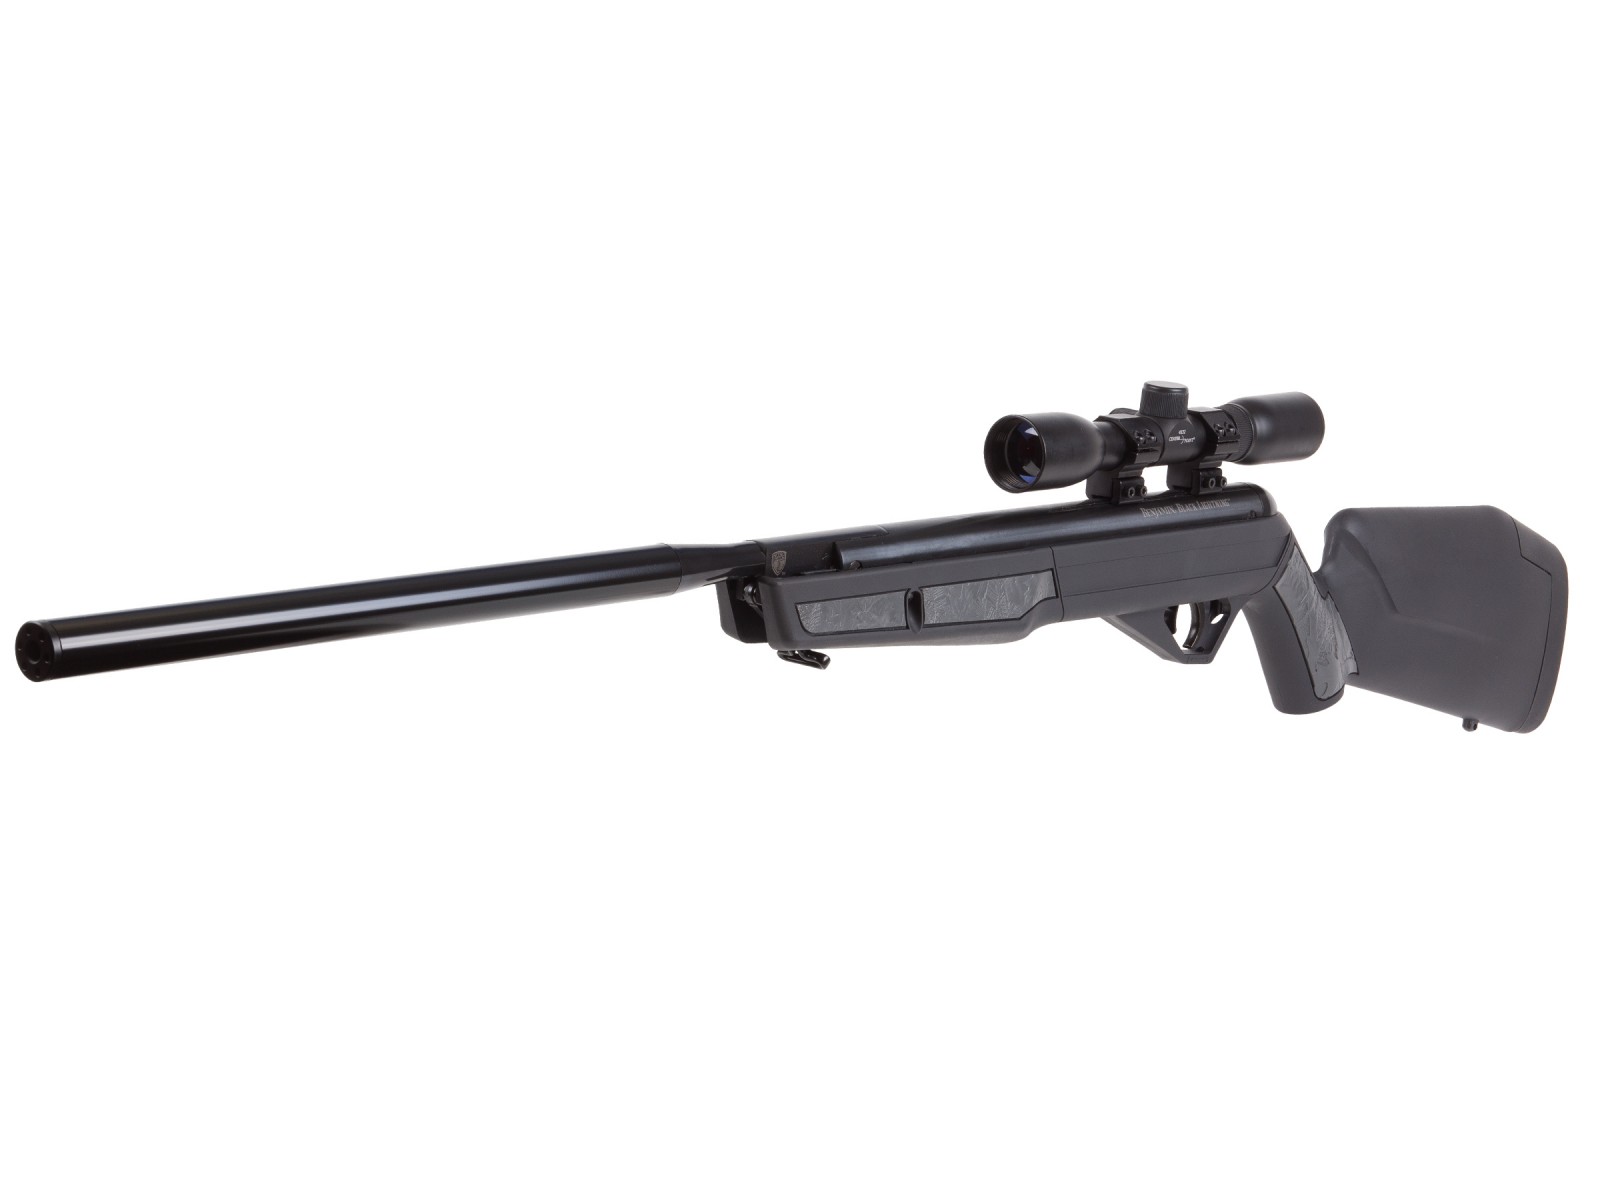 Black Lightning NP2 Air Rifle with Scope